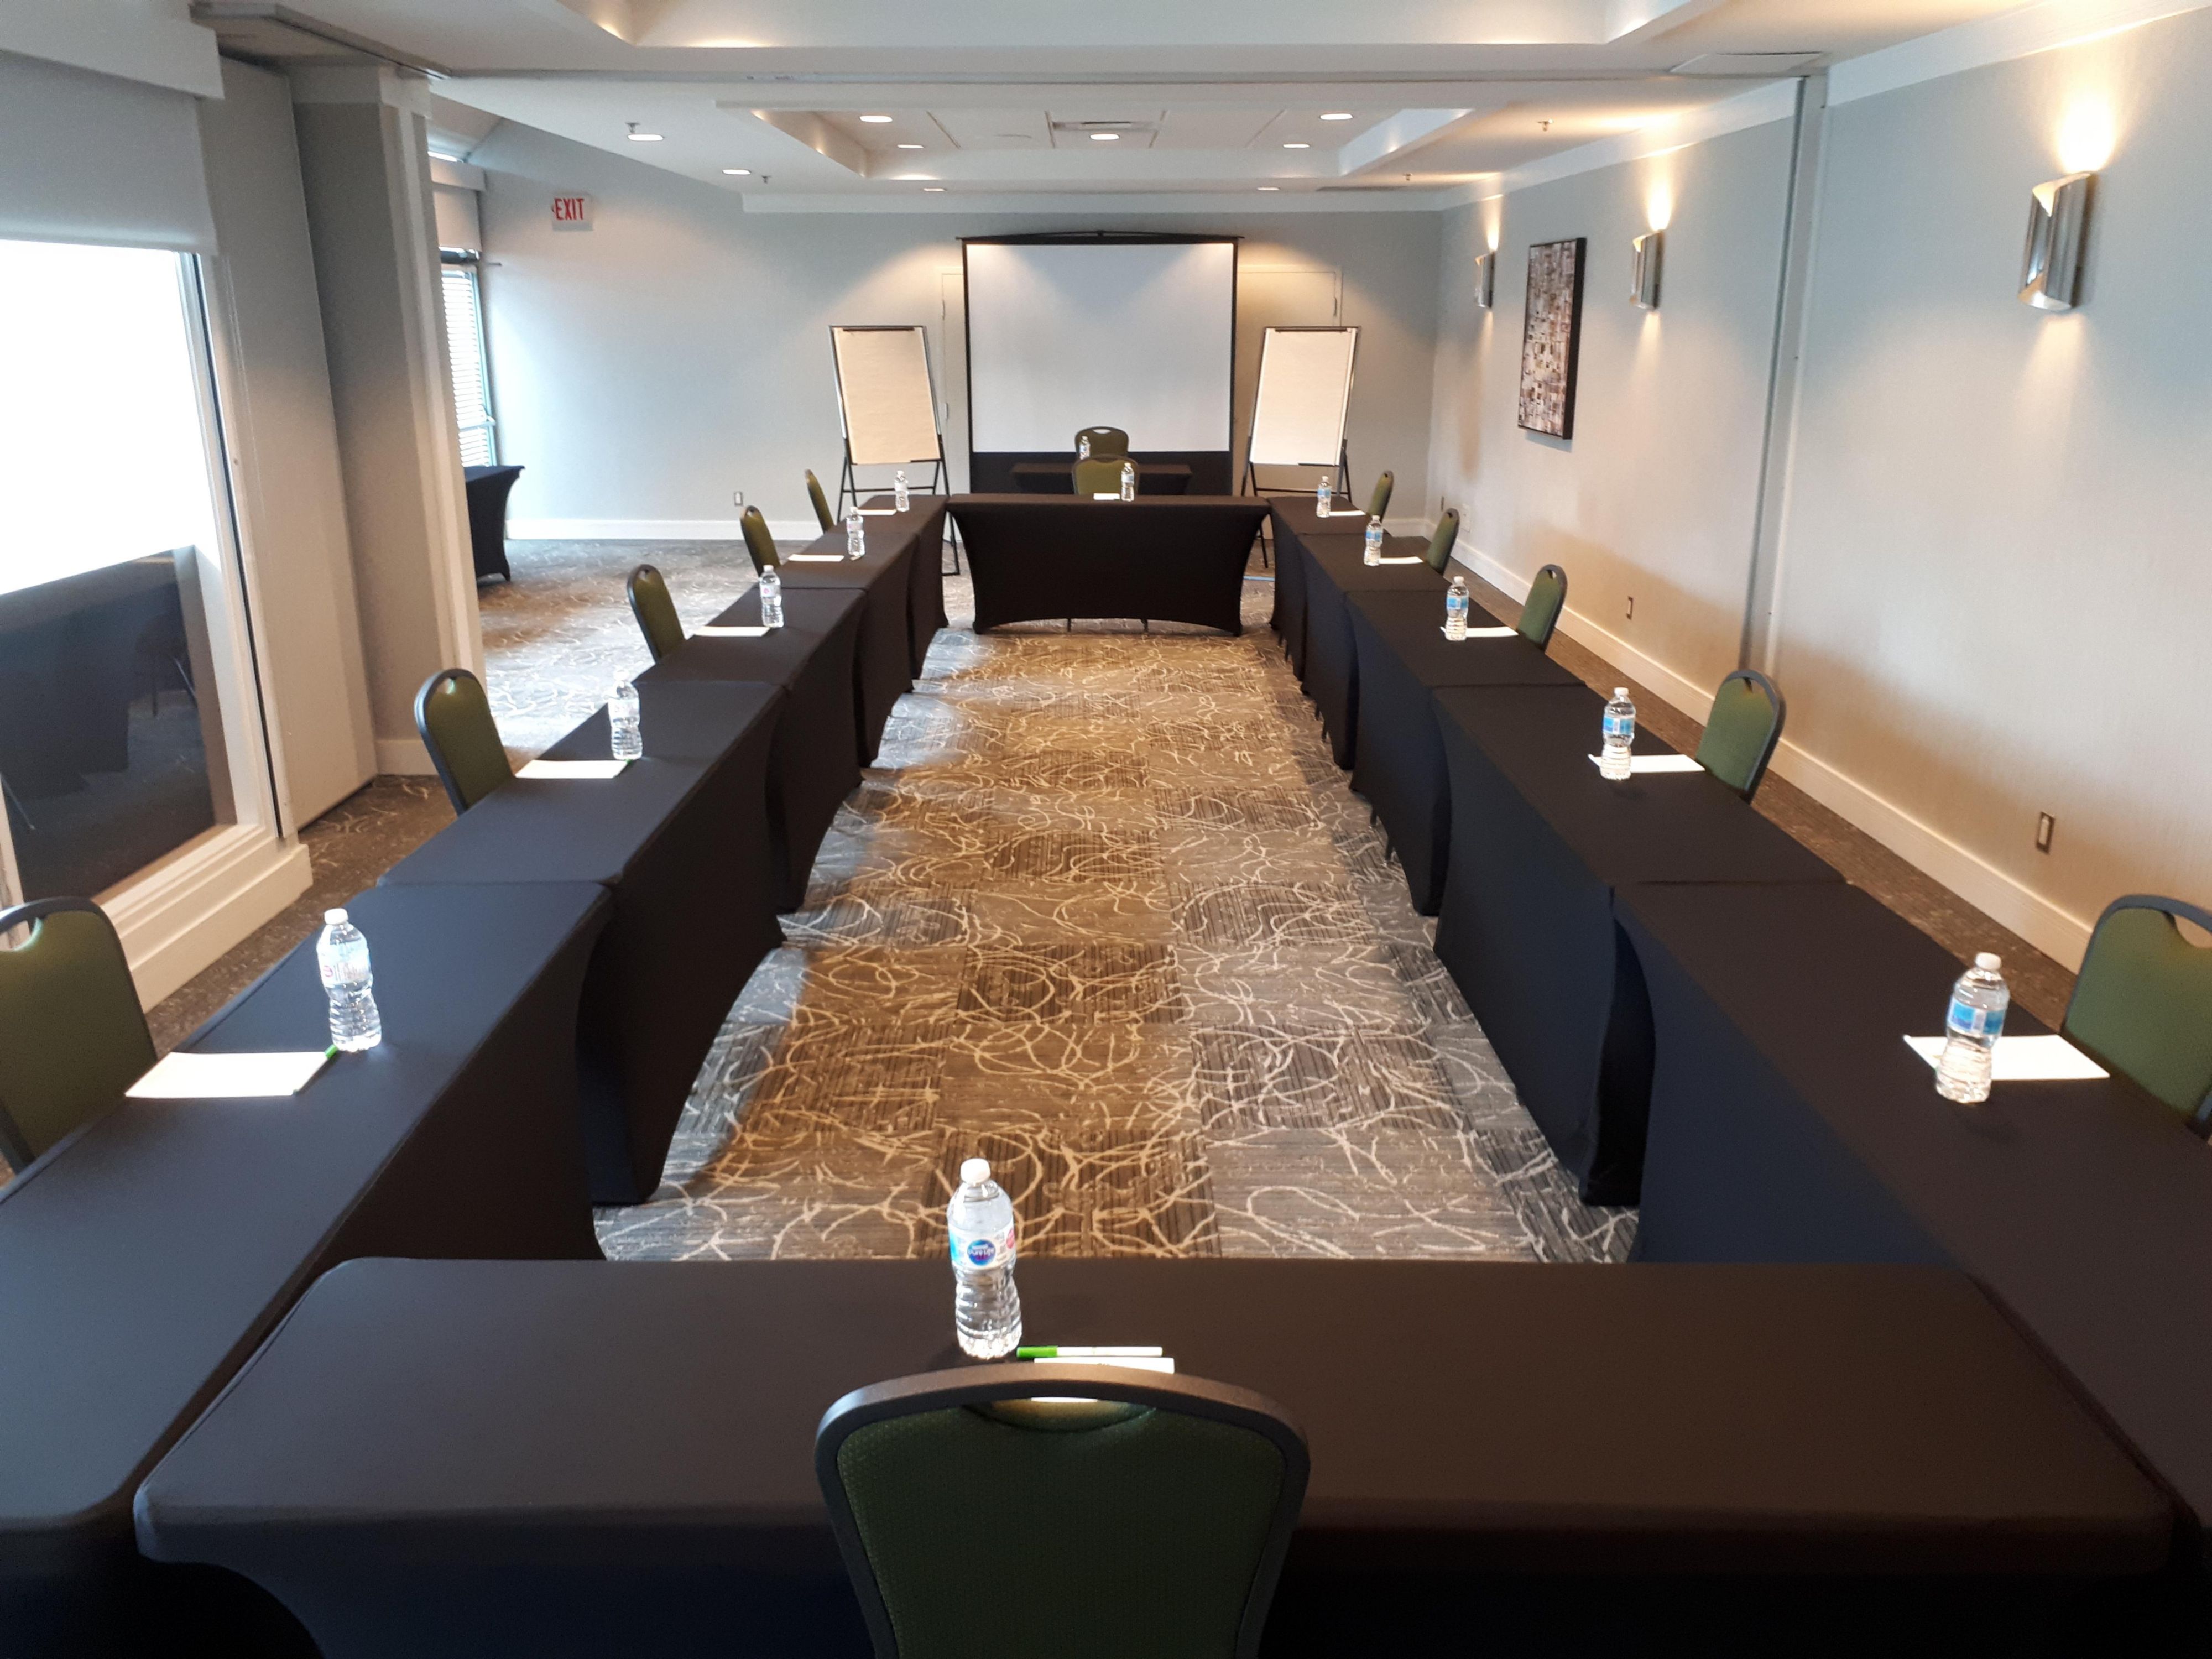 Experience our versatile 2,080 square feet of space for your next event.  Perfect for small to medium-sized groups, we will work with you to set up all the essentials you need for your meeting including catering and A/V equipment.